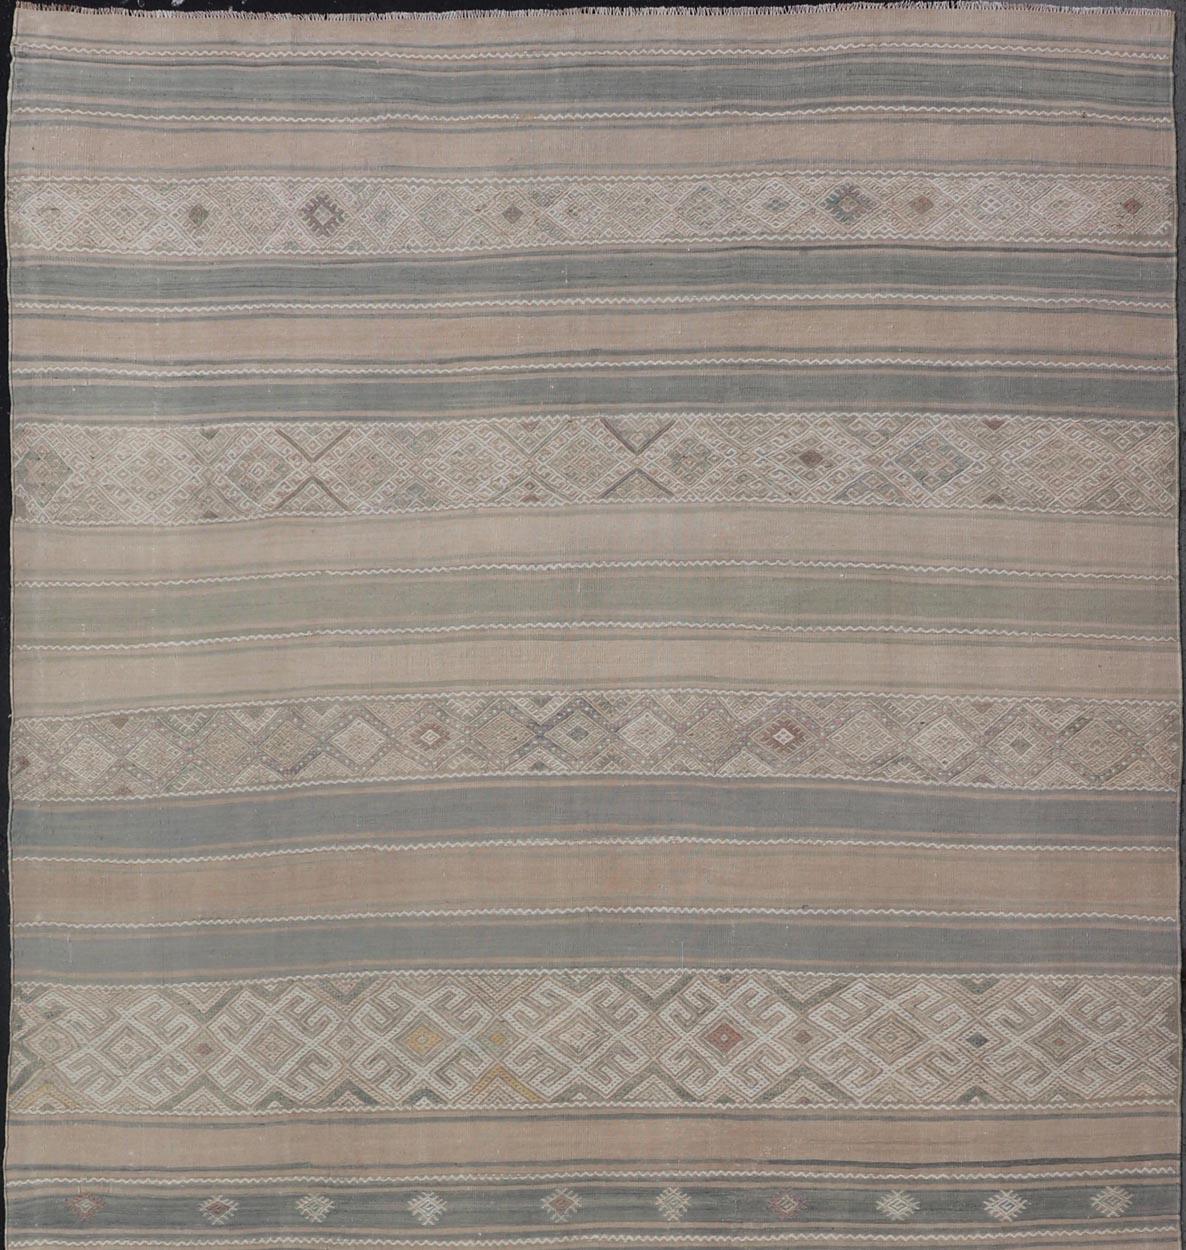 Hand-Woven Gallery Vintage Turkish Flat-Weave Kilim with Embroideries in Earthy Tones